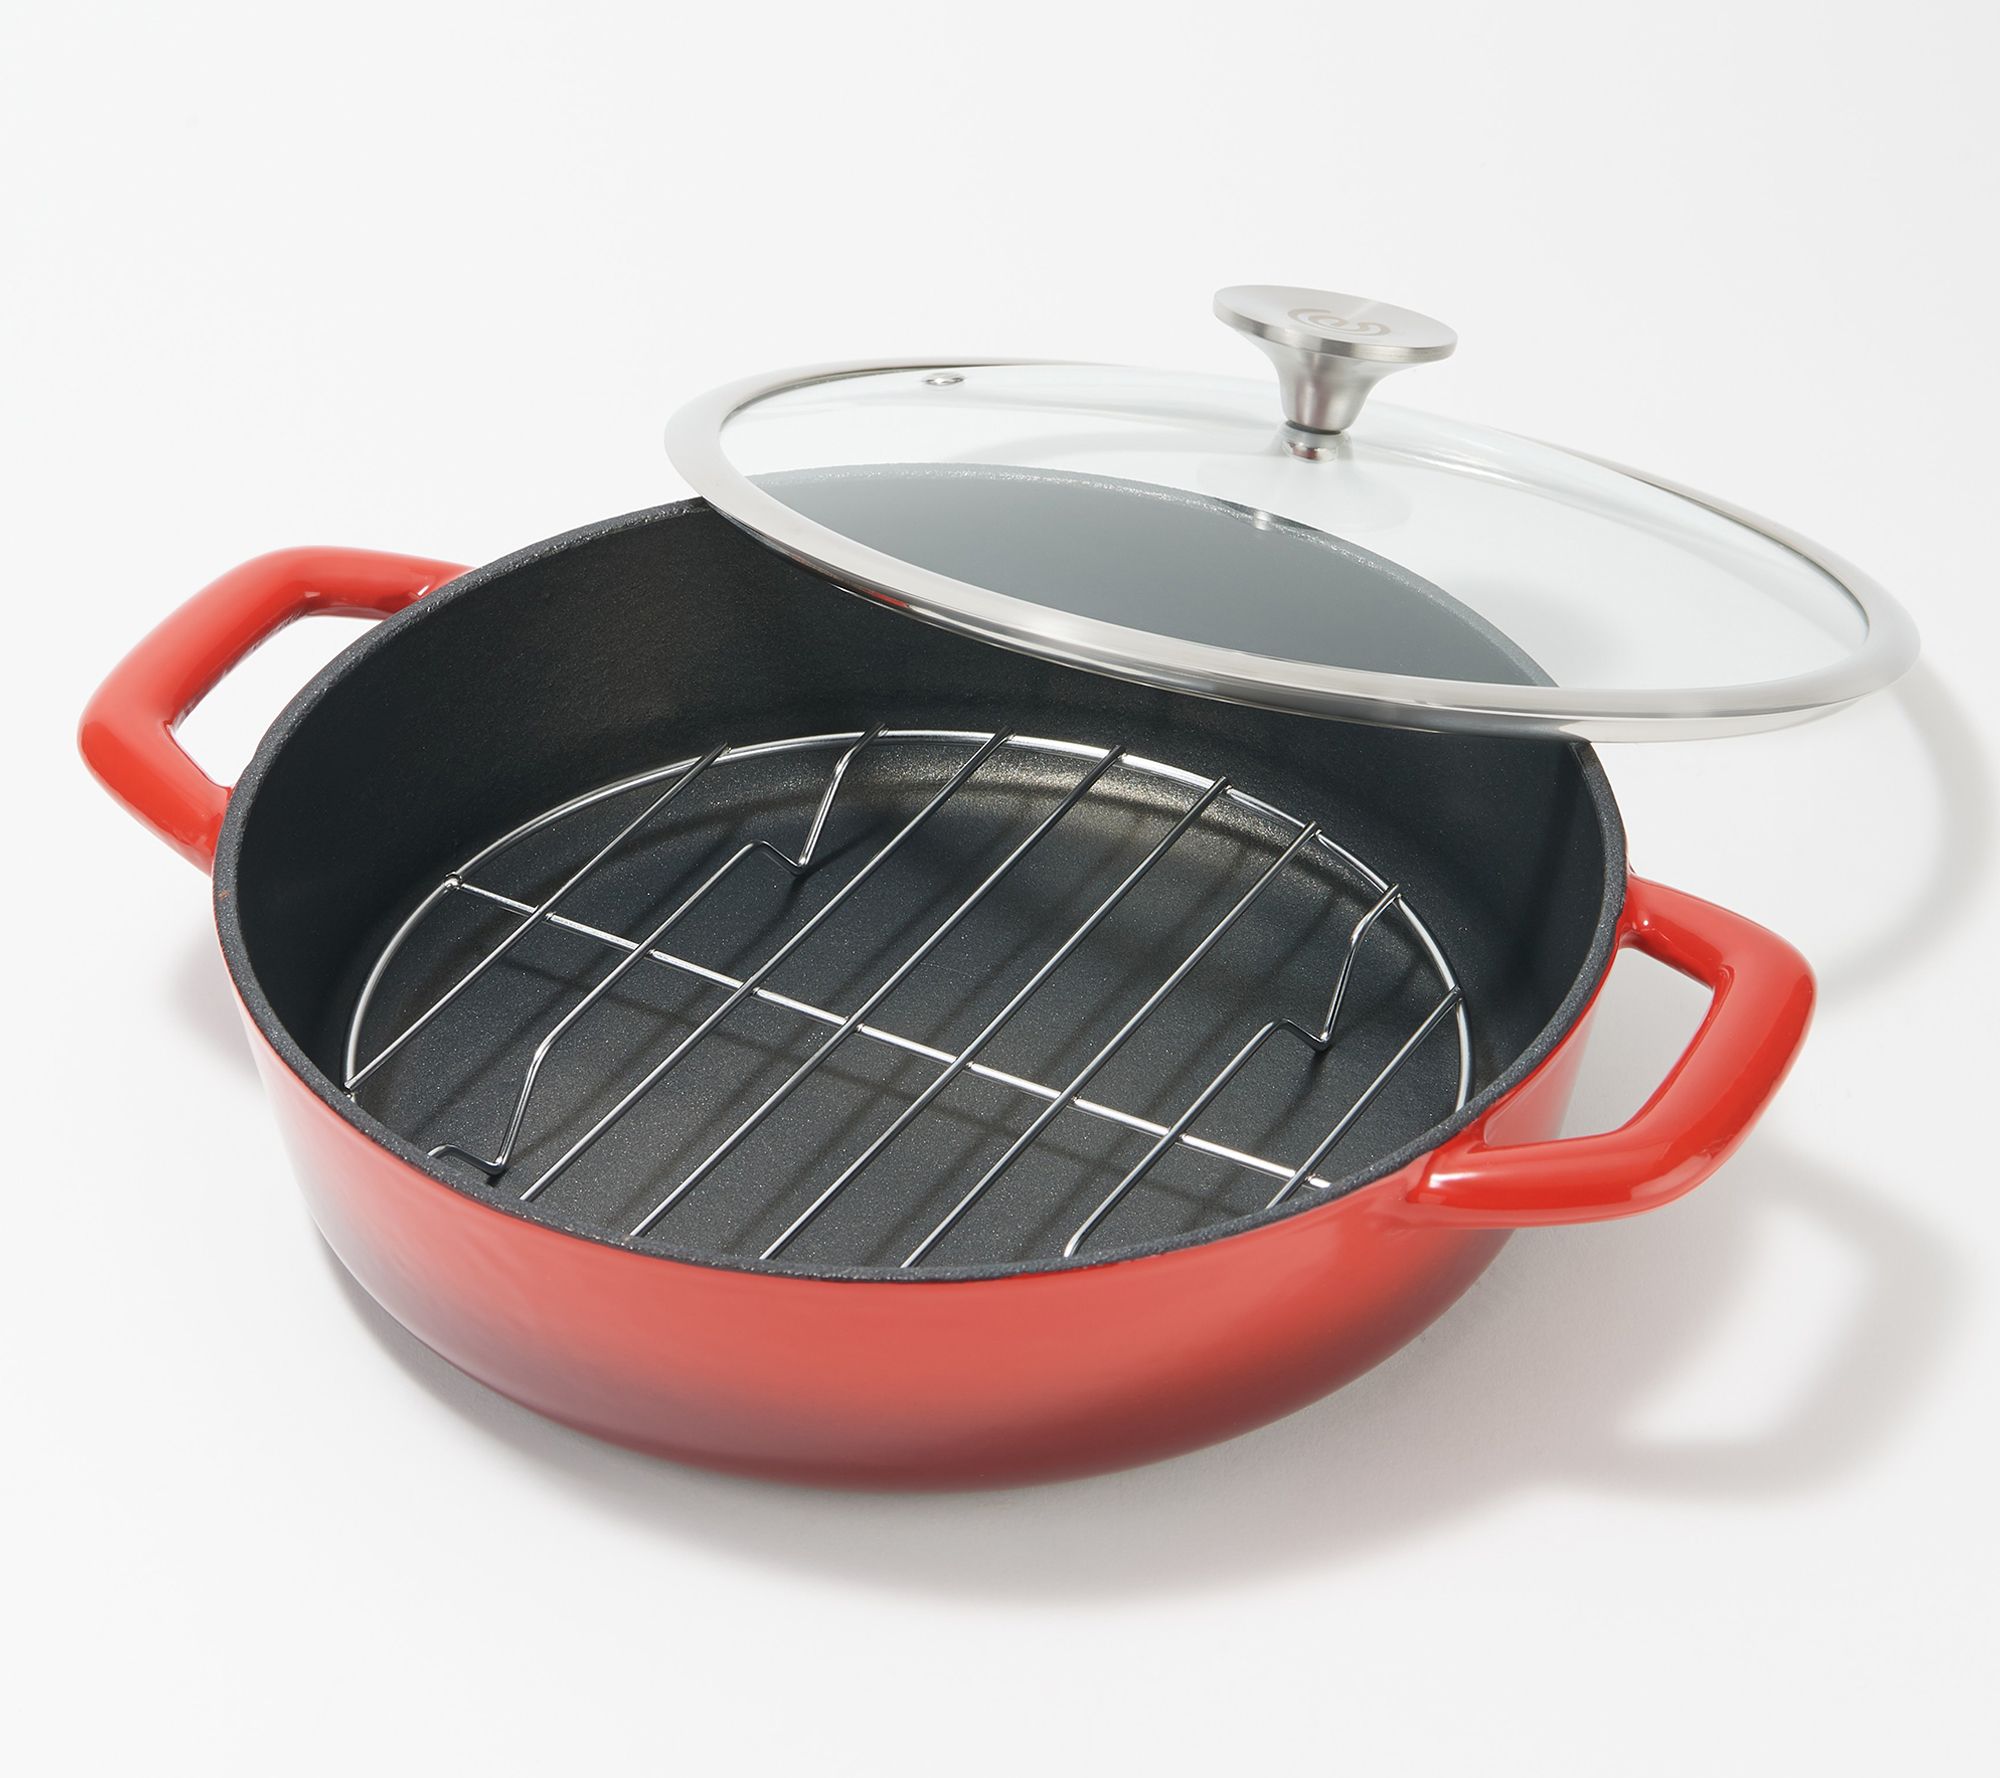 How to care for your cookware—stainless steel, cast-iron, nonstick